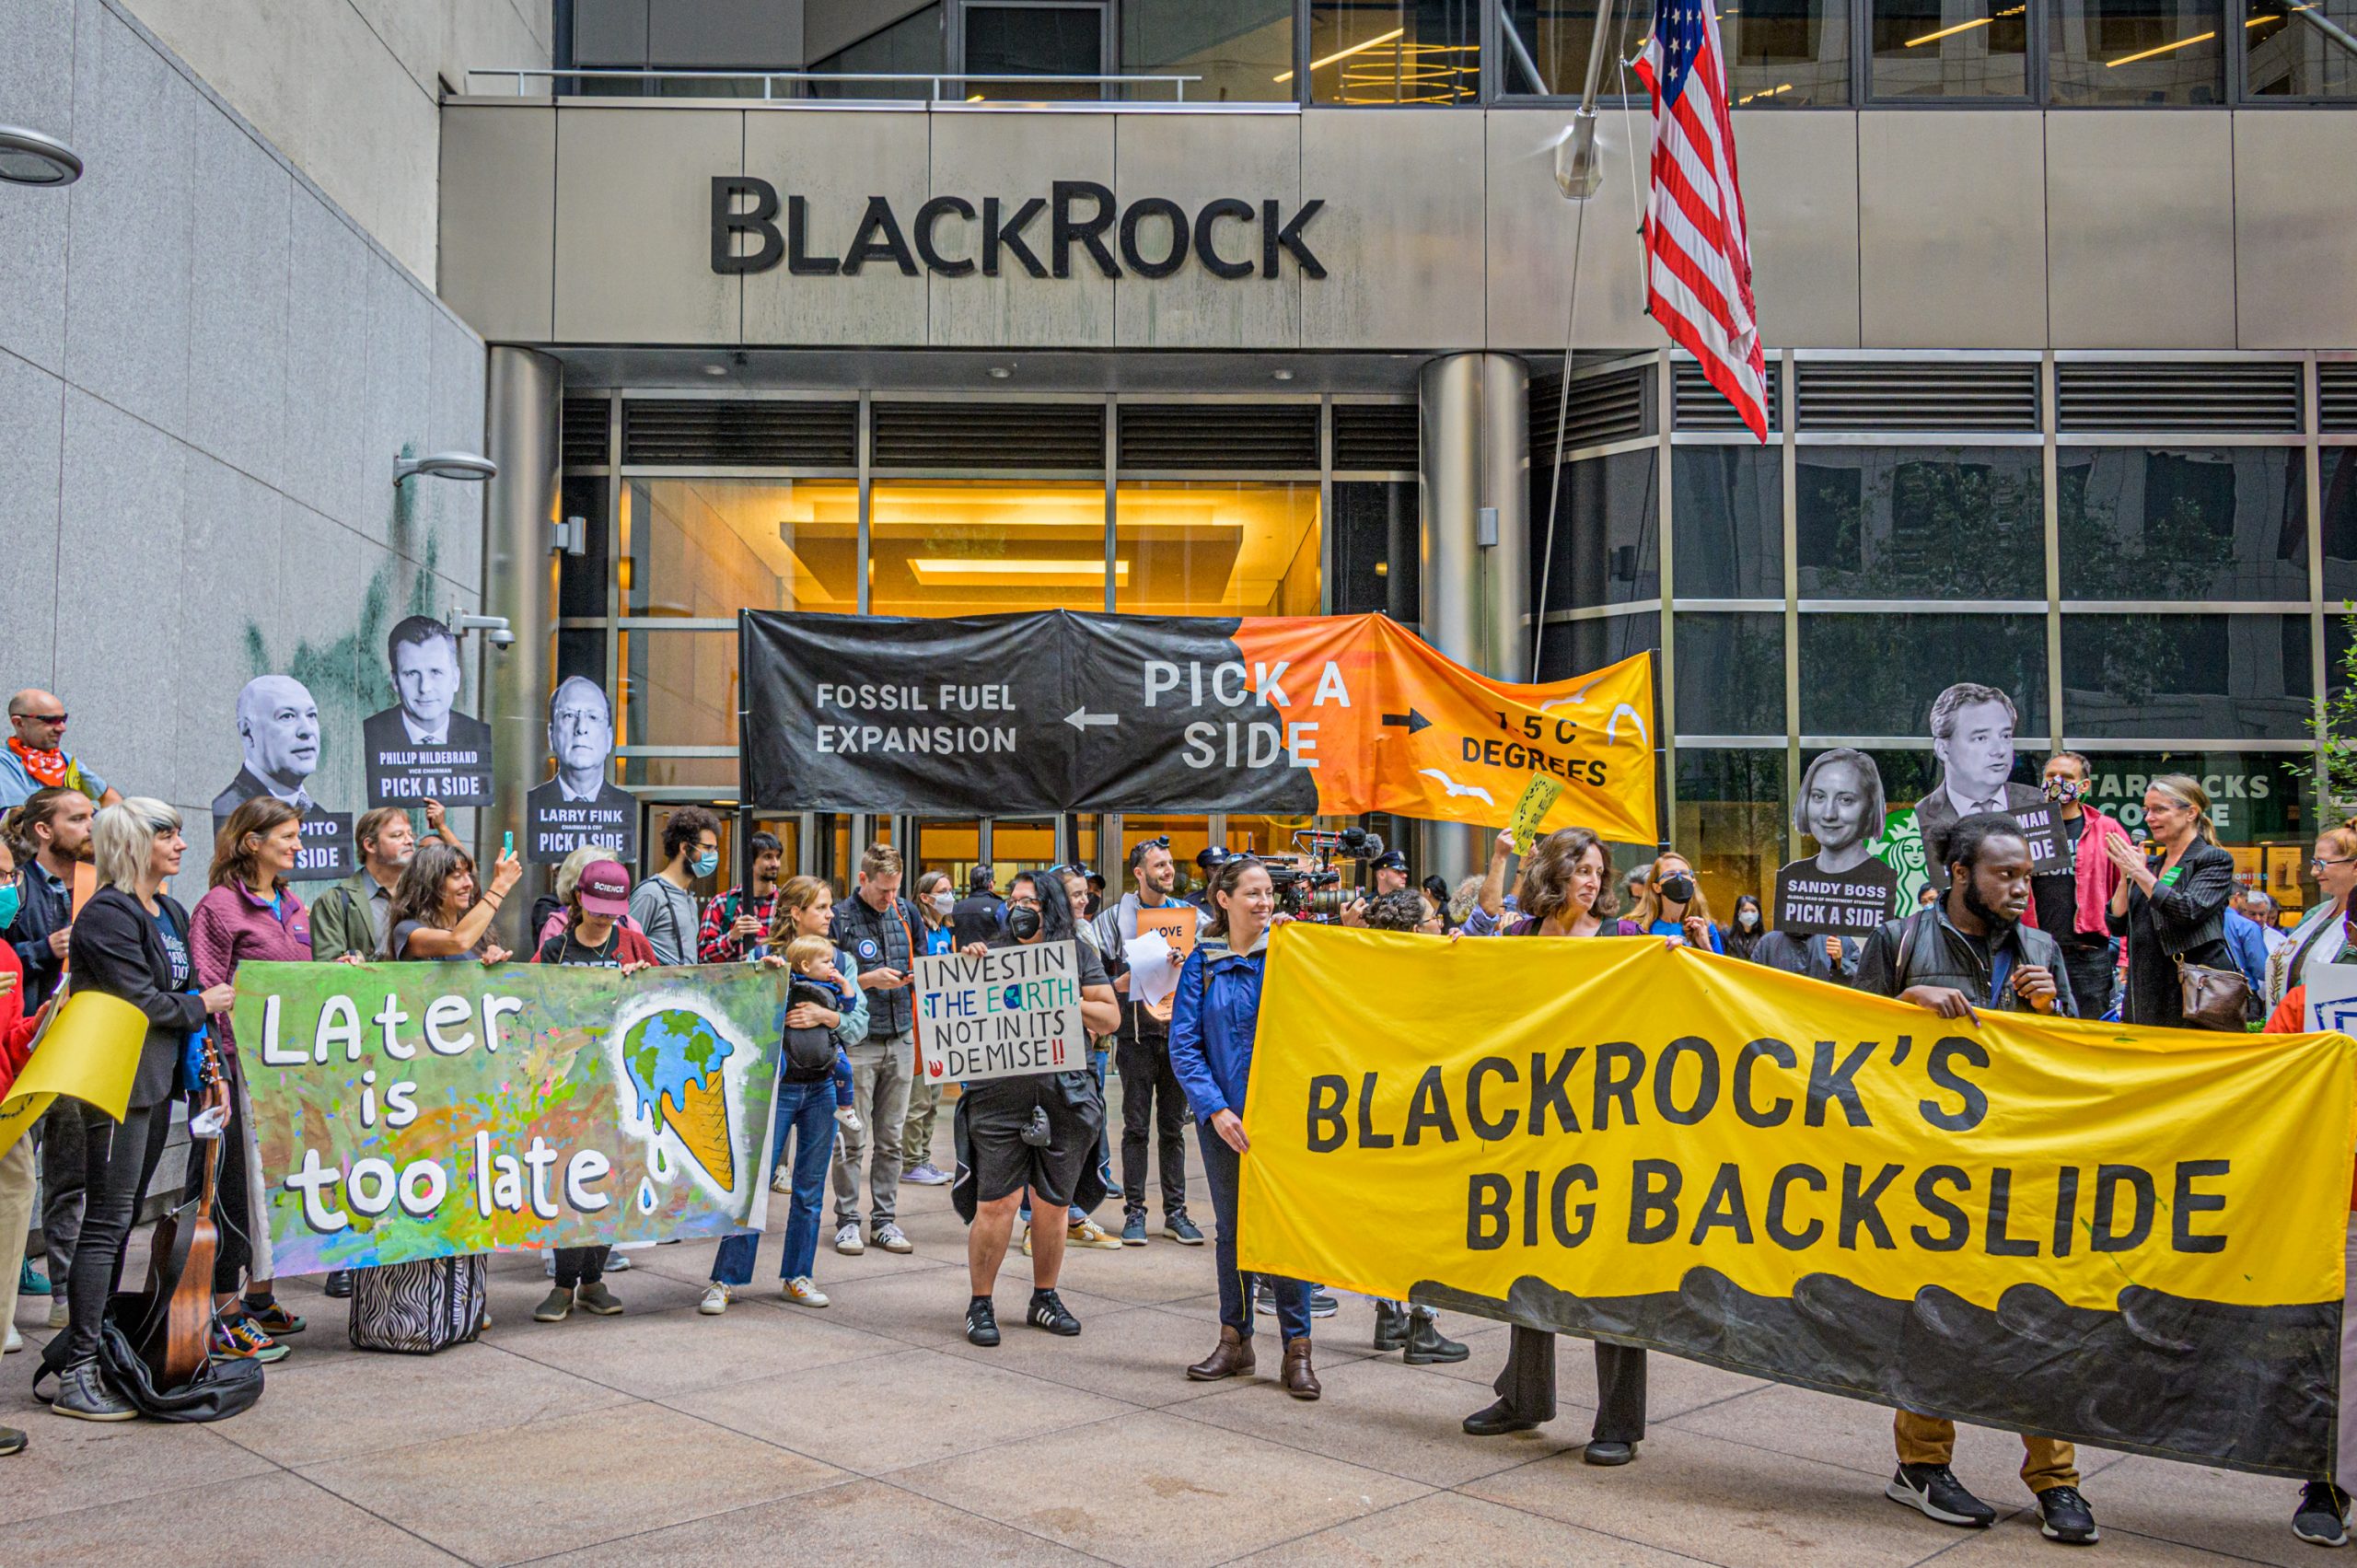 A crowd of activists with several large banners and signs stand in front of BlackRock's headquarters. The signs read "Fossil Fuel expansion or 1.5C degrees, pick a side", "Later is too late", "BlackRock's Big Backslide", and "New York Communities for Change." Photo by Erik McGregor.